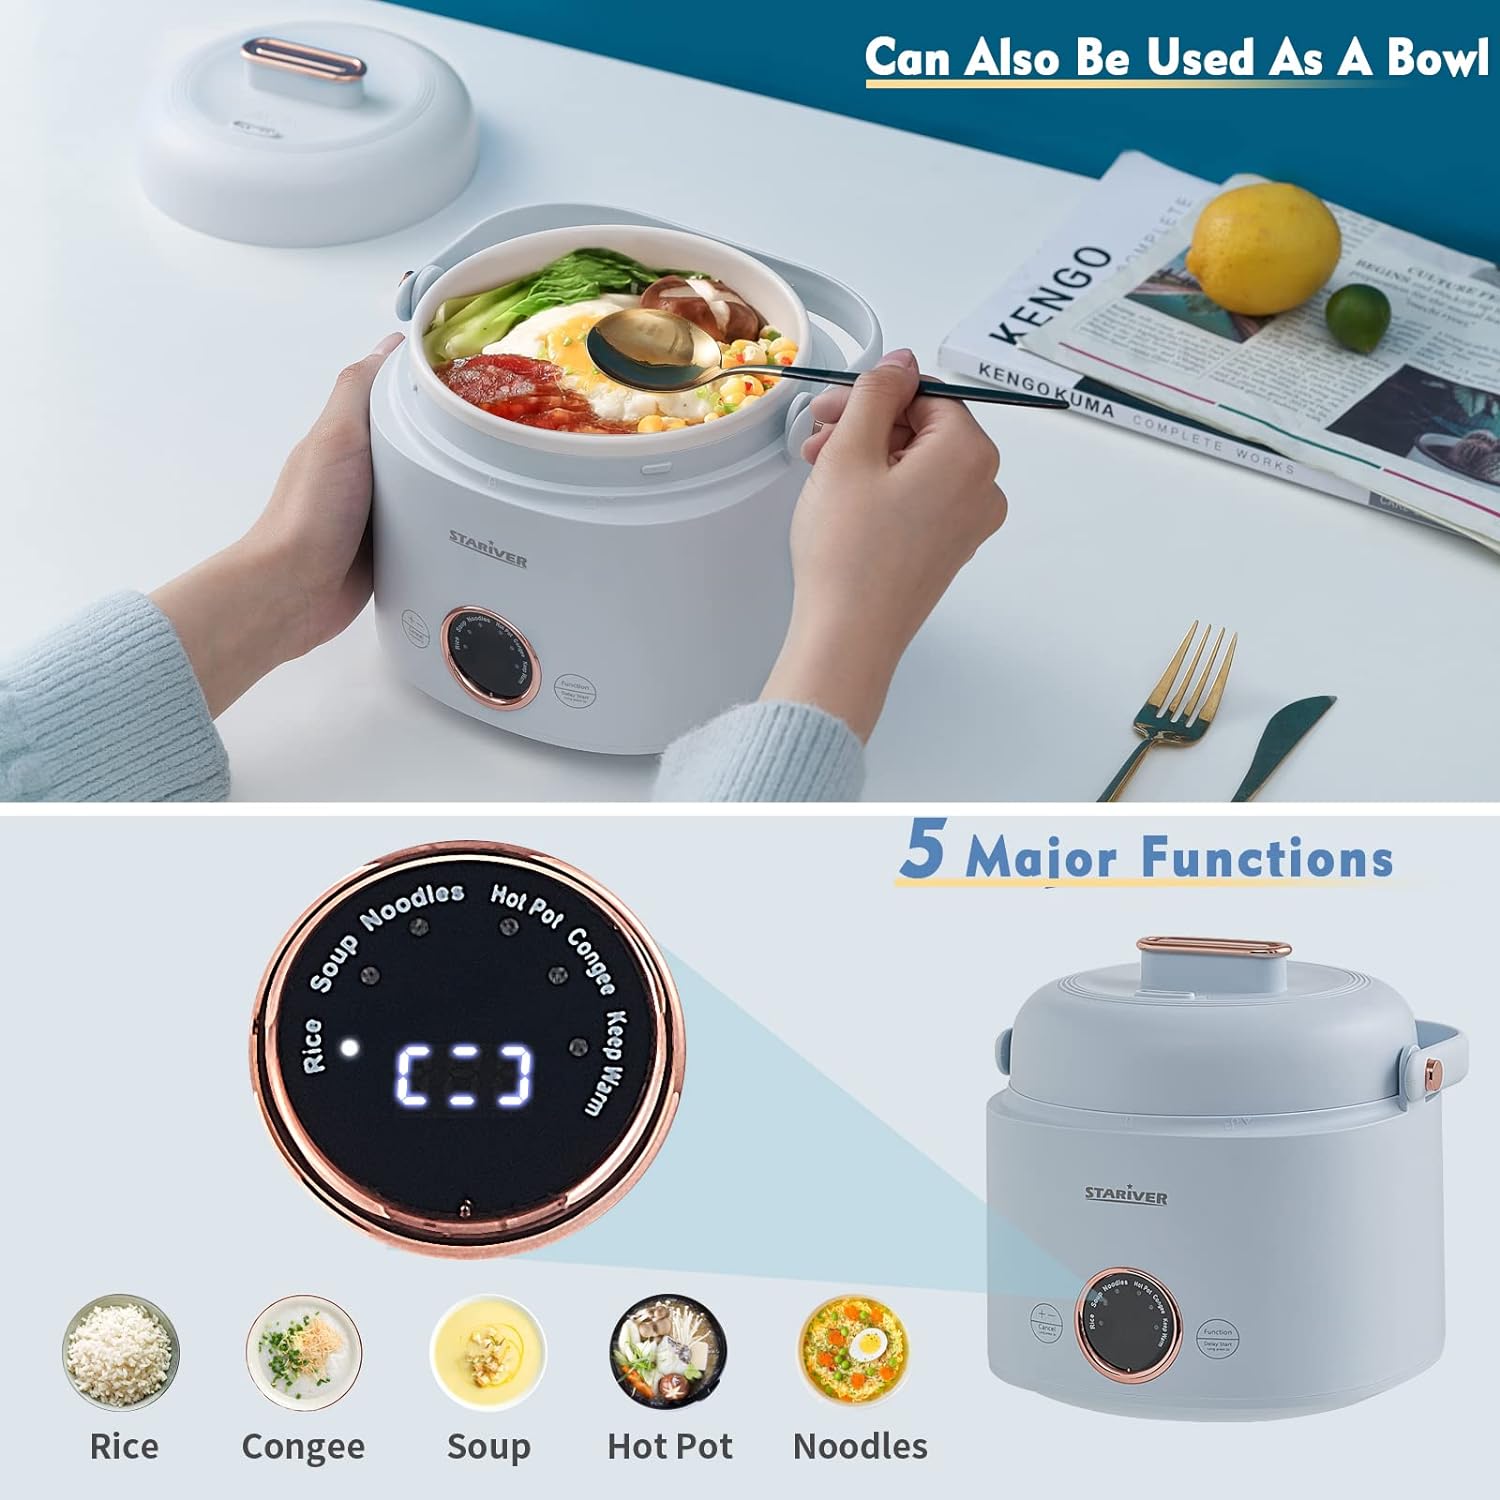 Stariver Rice Cooker 5 functions